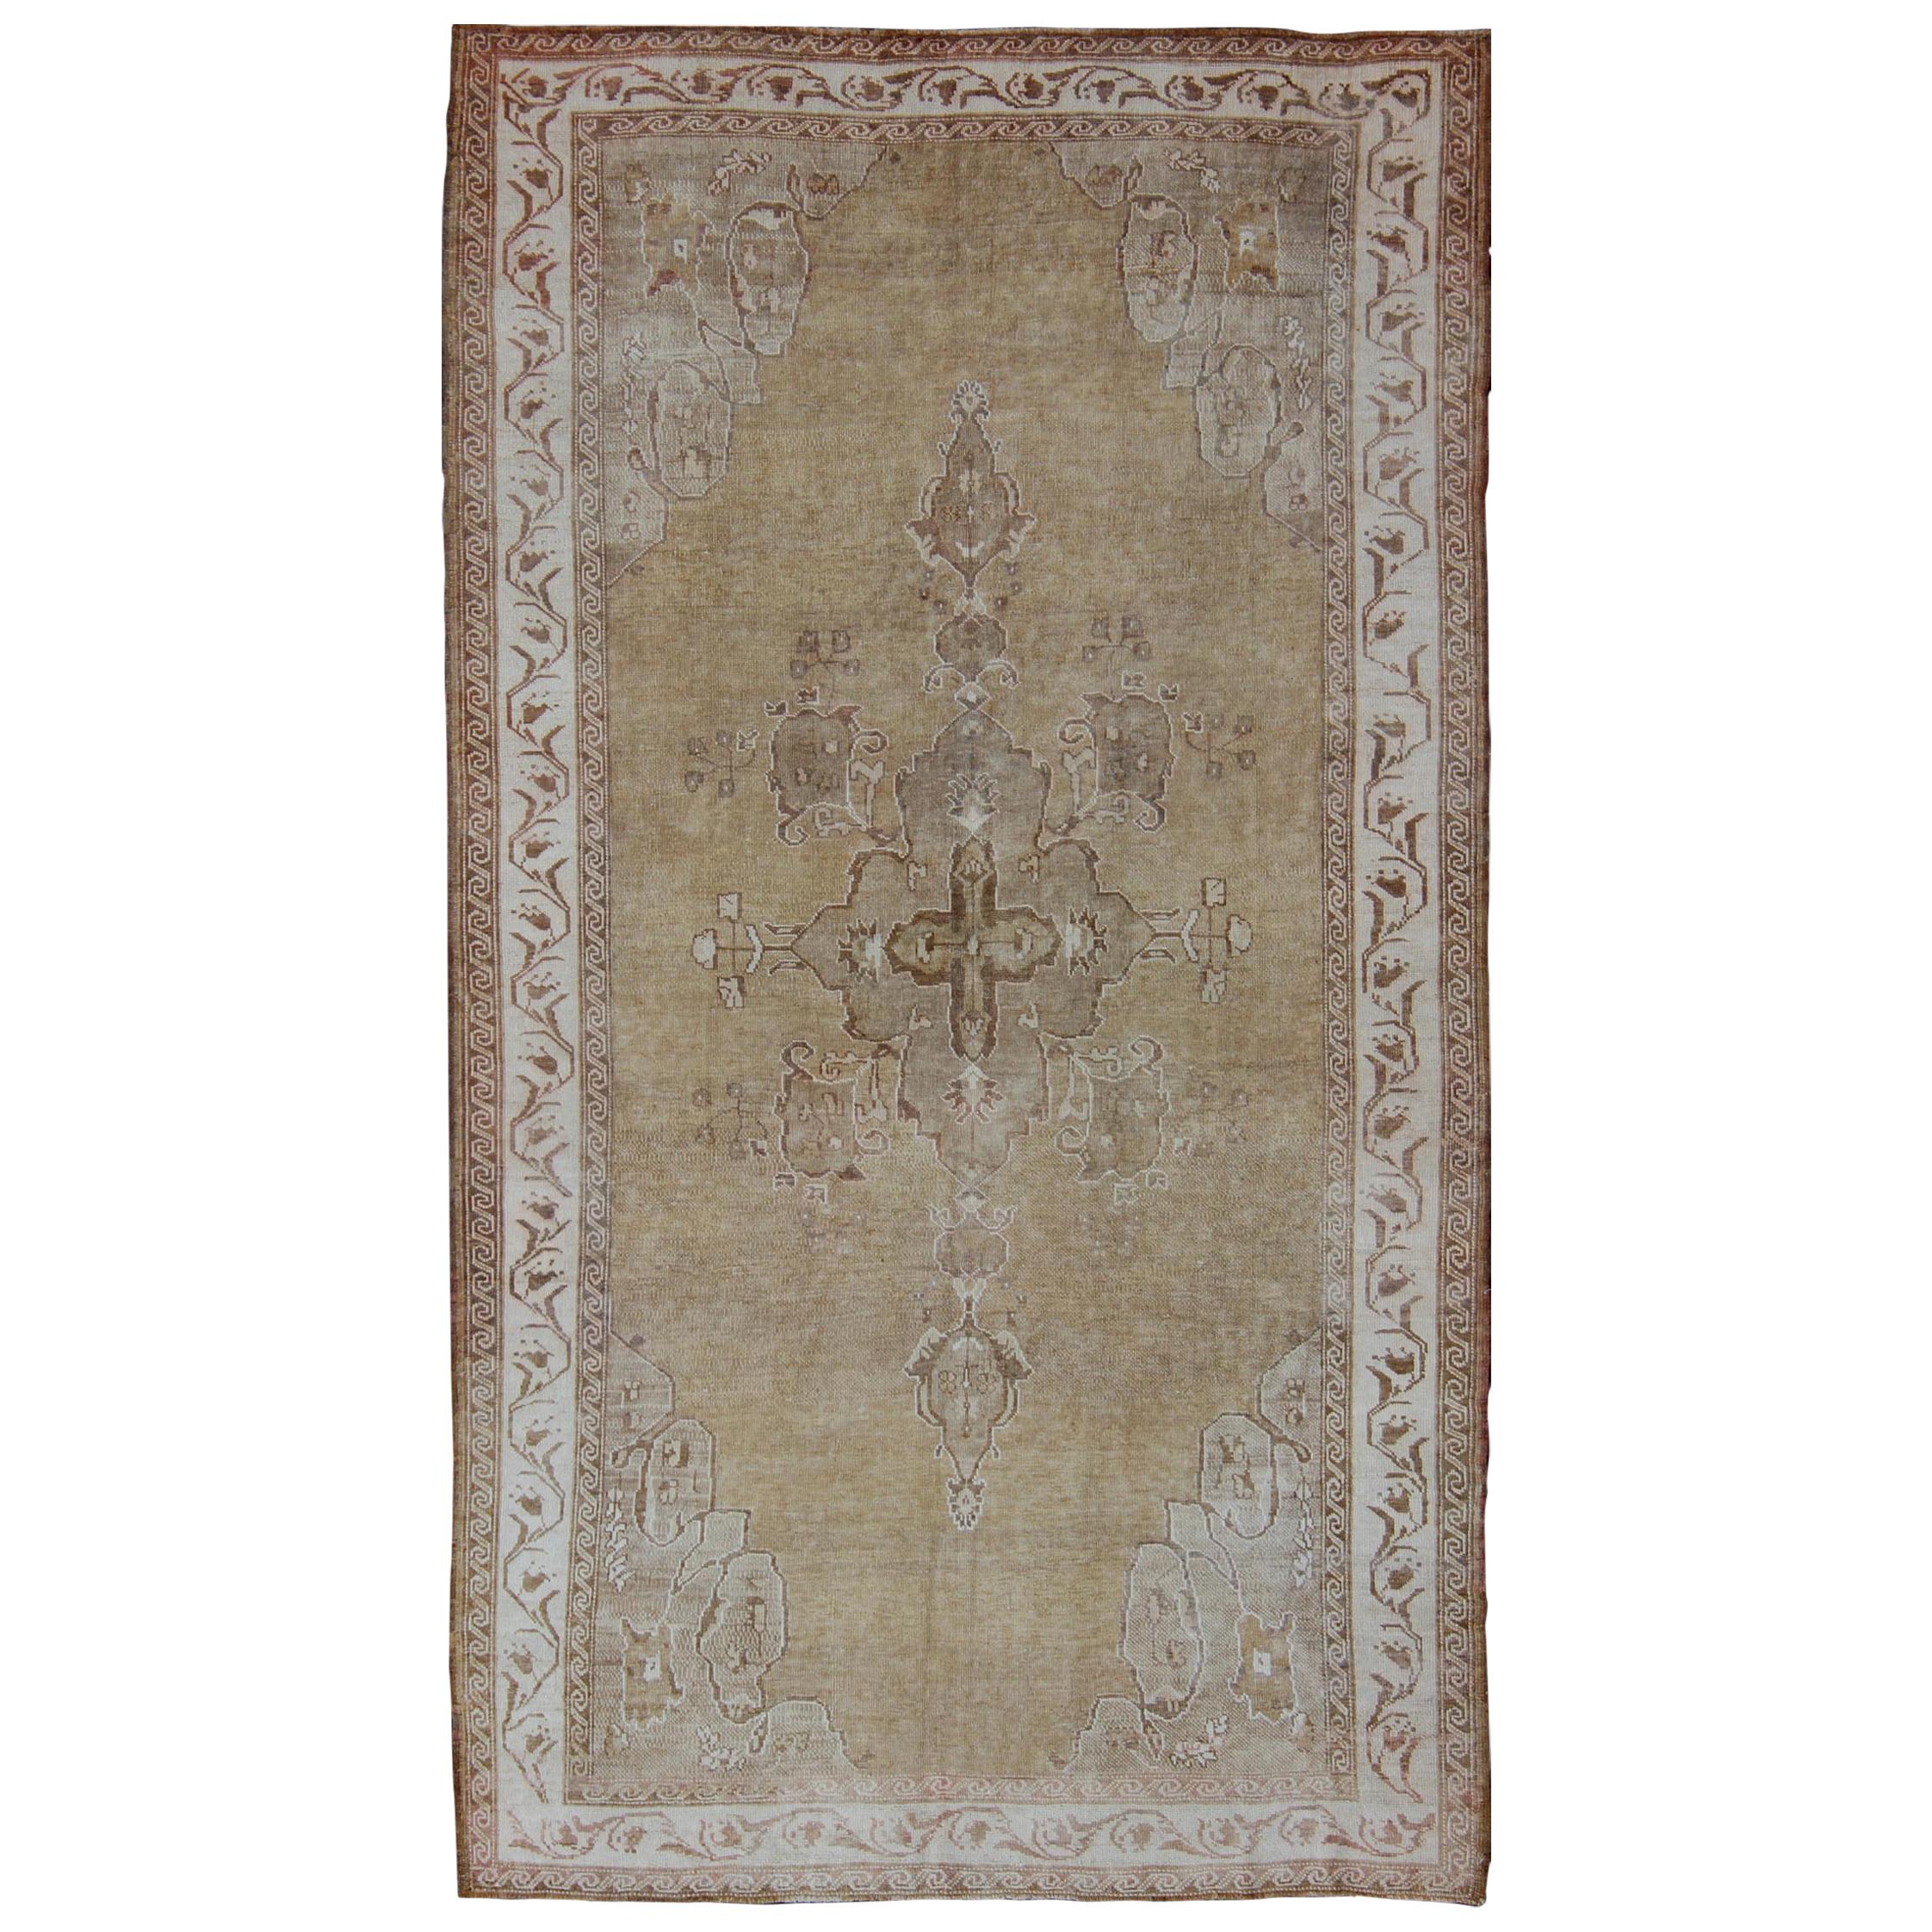 Vintage Turkish Kars Gallery Rug With Earthy Color Palette and Ivory Border